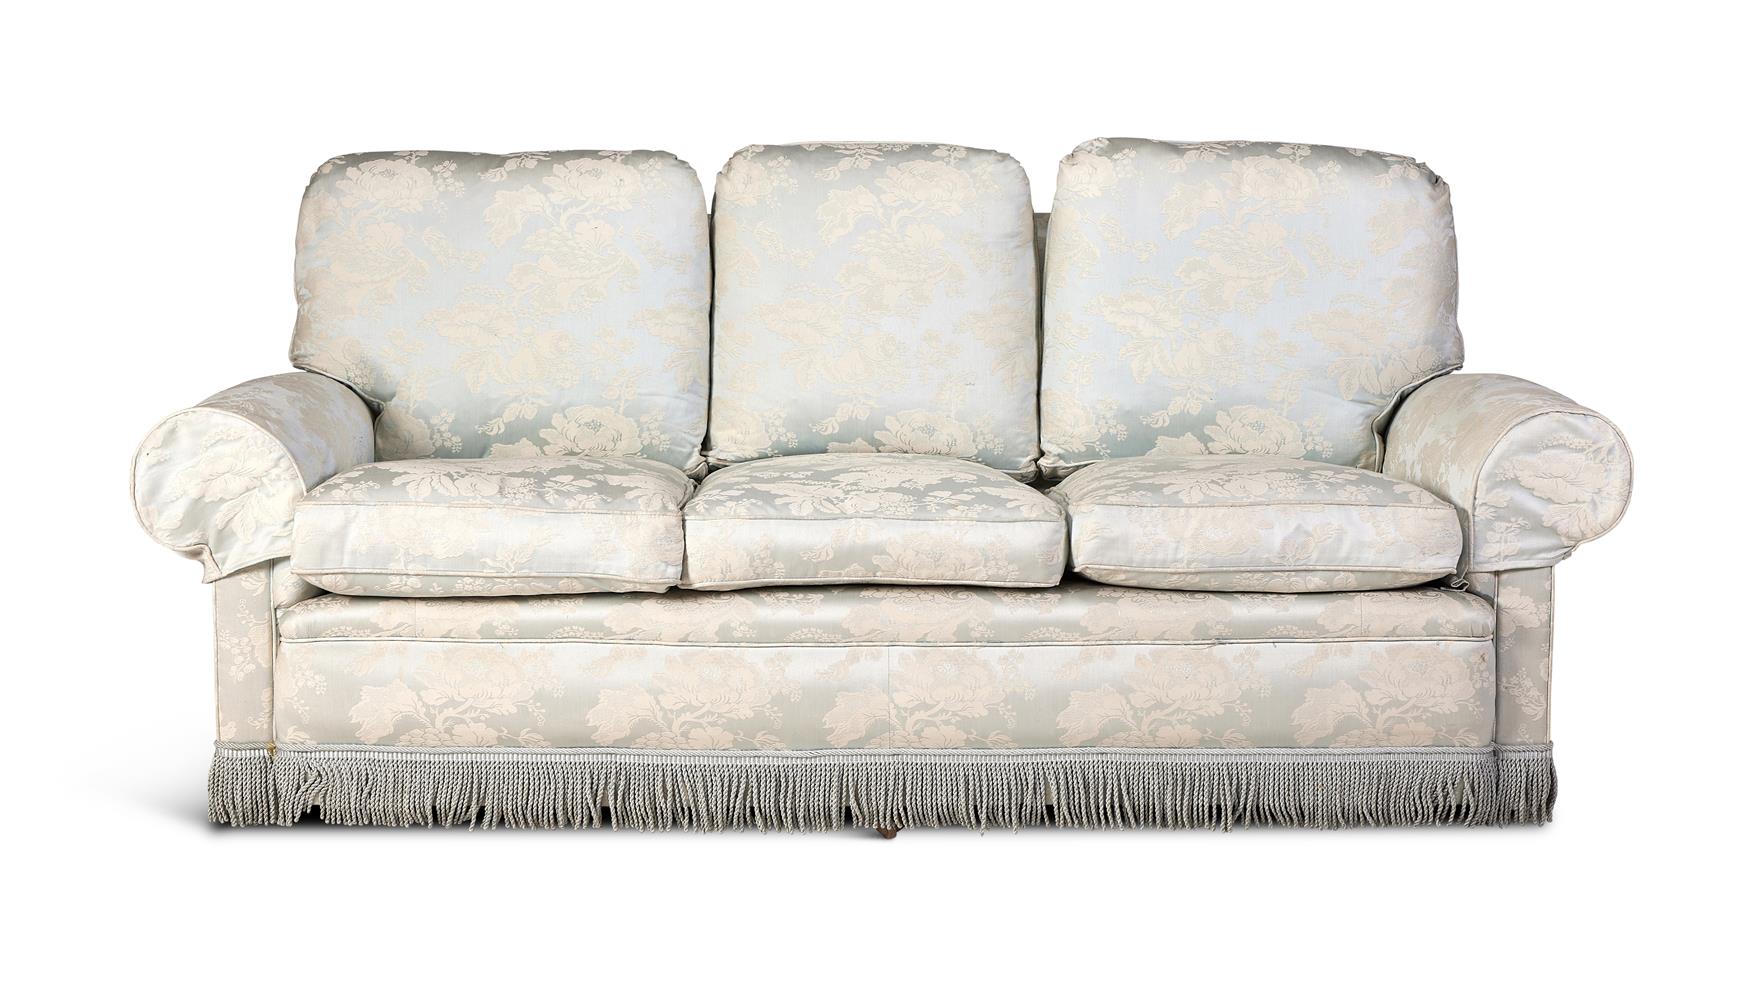 A DAMASK UPHOLSTERED THREE-SEAT SOFAIN THE MANNER OF HOWARD & SONS - Image 2 of 3